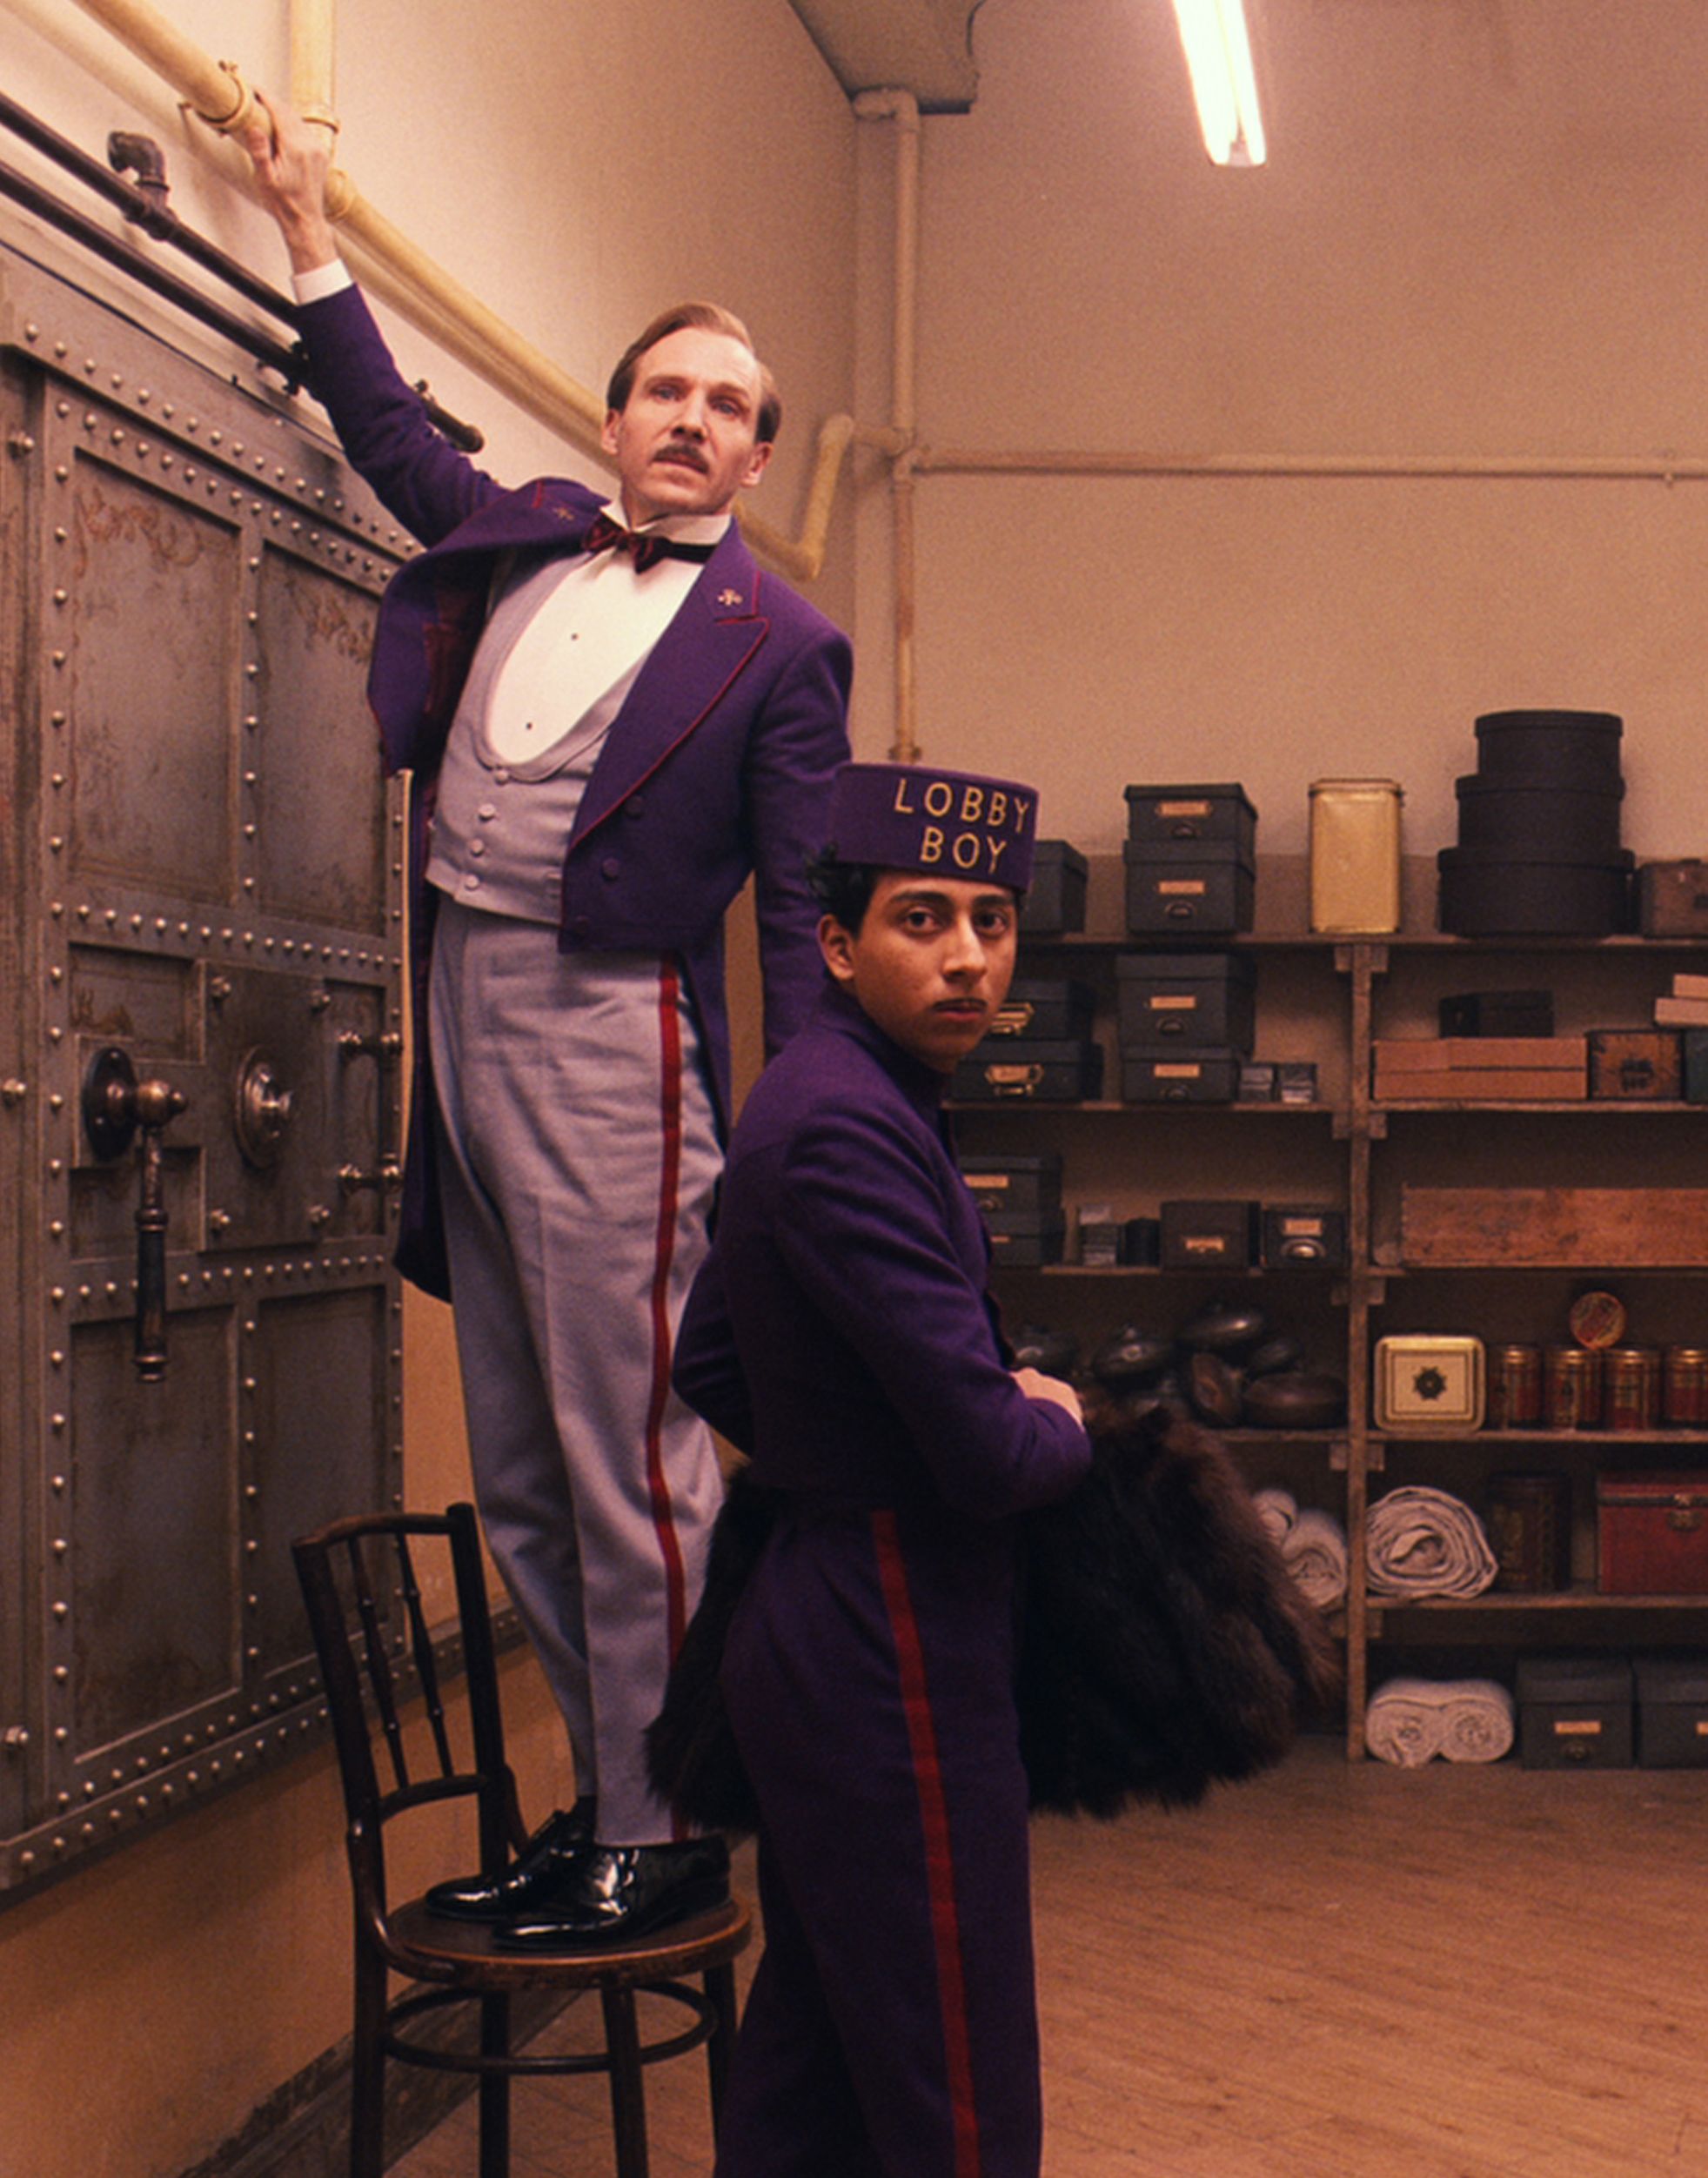 Gustave and lobby boy caught - The Grand Budapest Hotel.